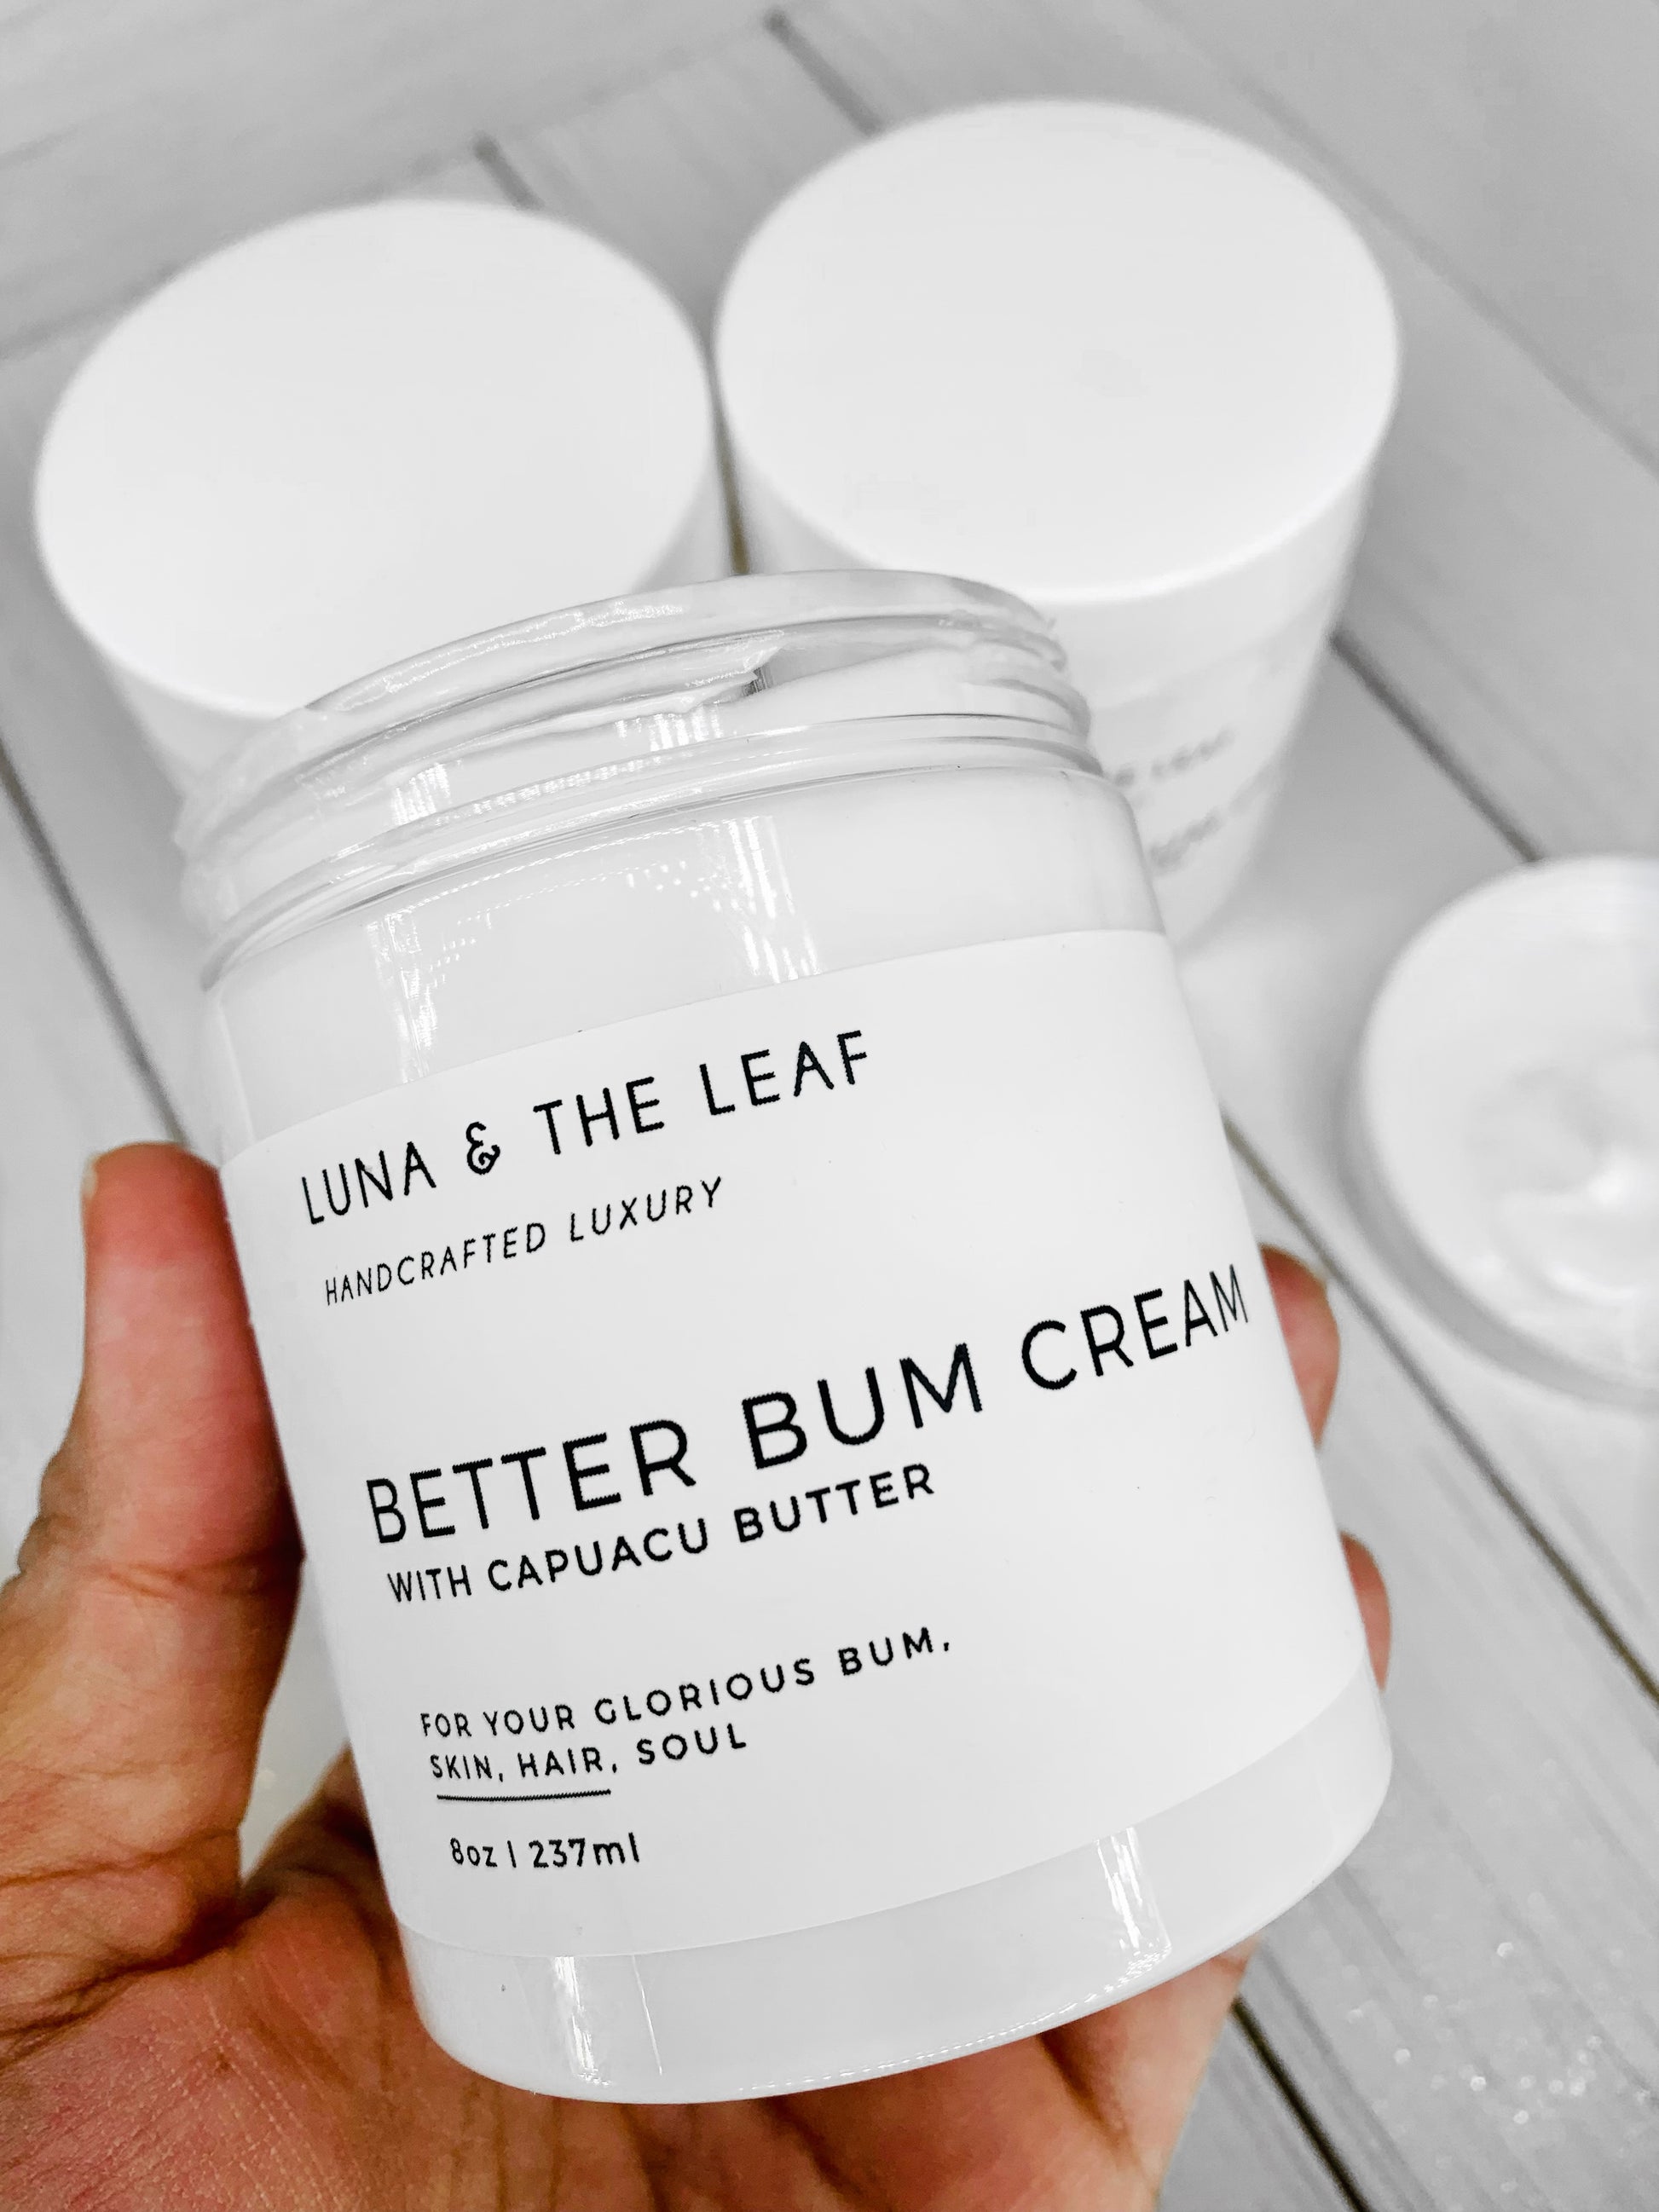 White cream in a container with a white label that reads Better Bum Cream with Cupuacu butter. It is being held by a hand with two more containers in the background. It is on a white wood background.